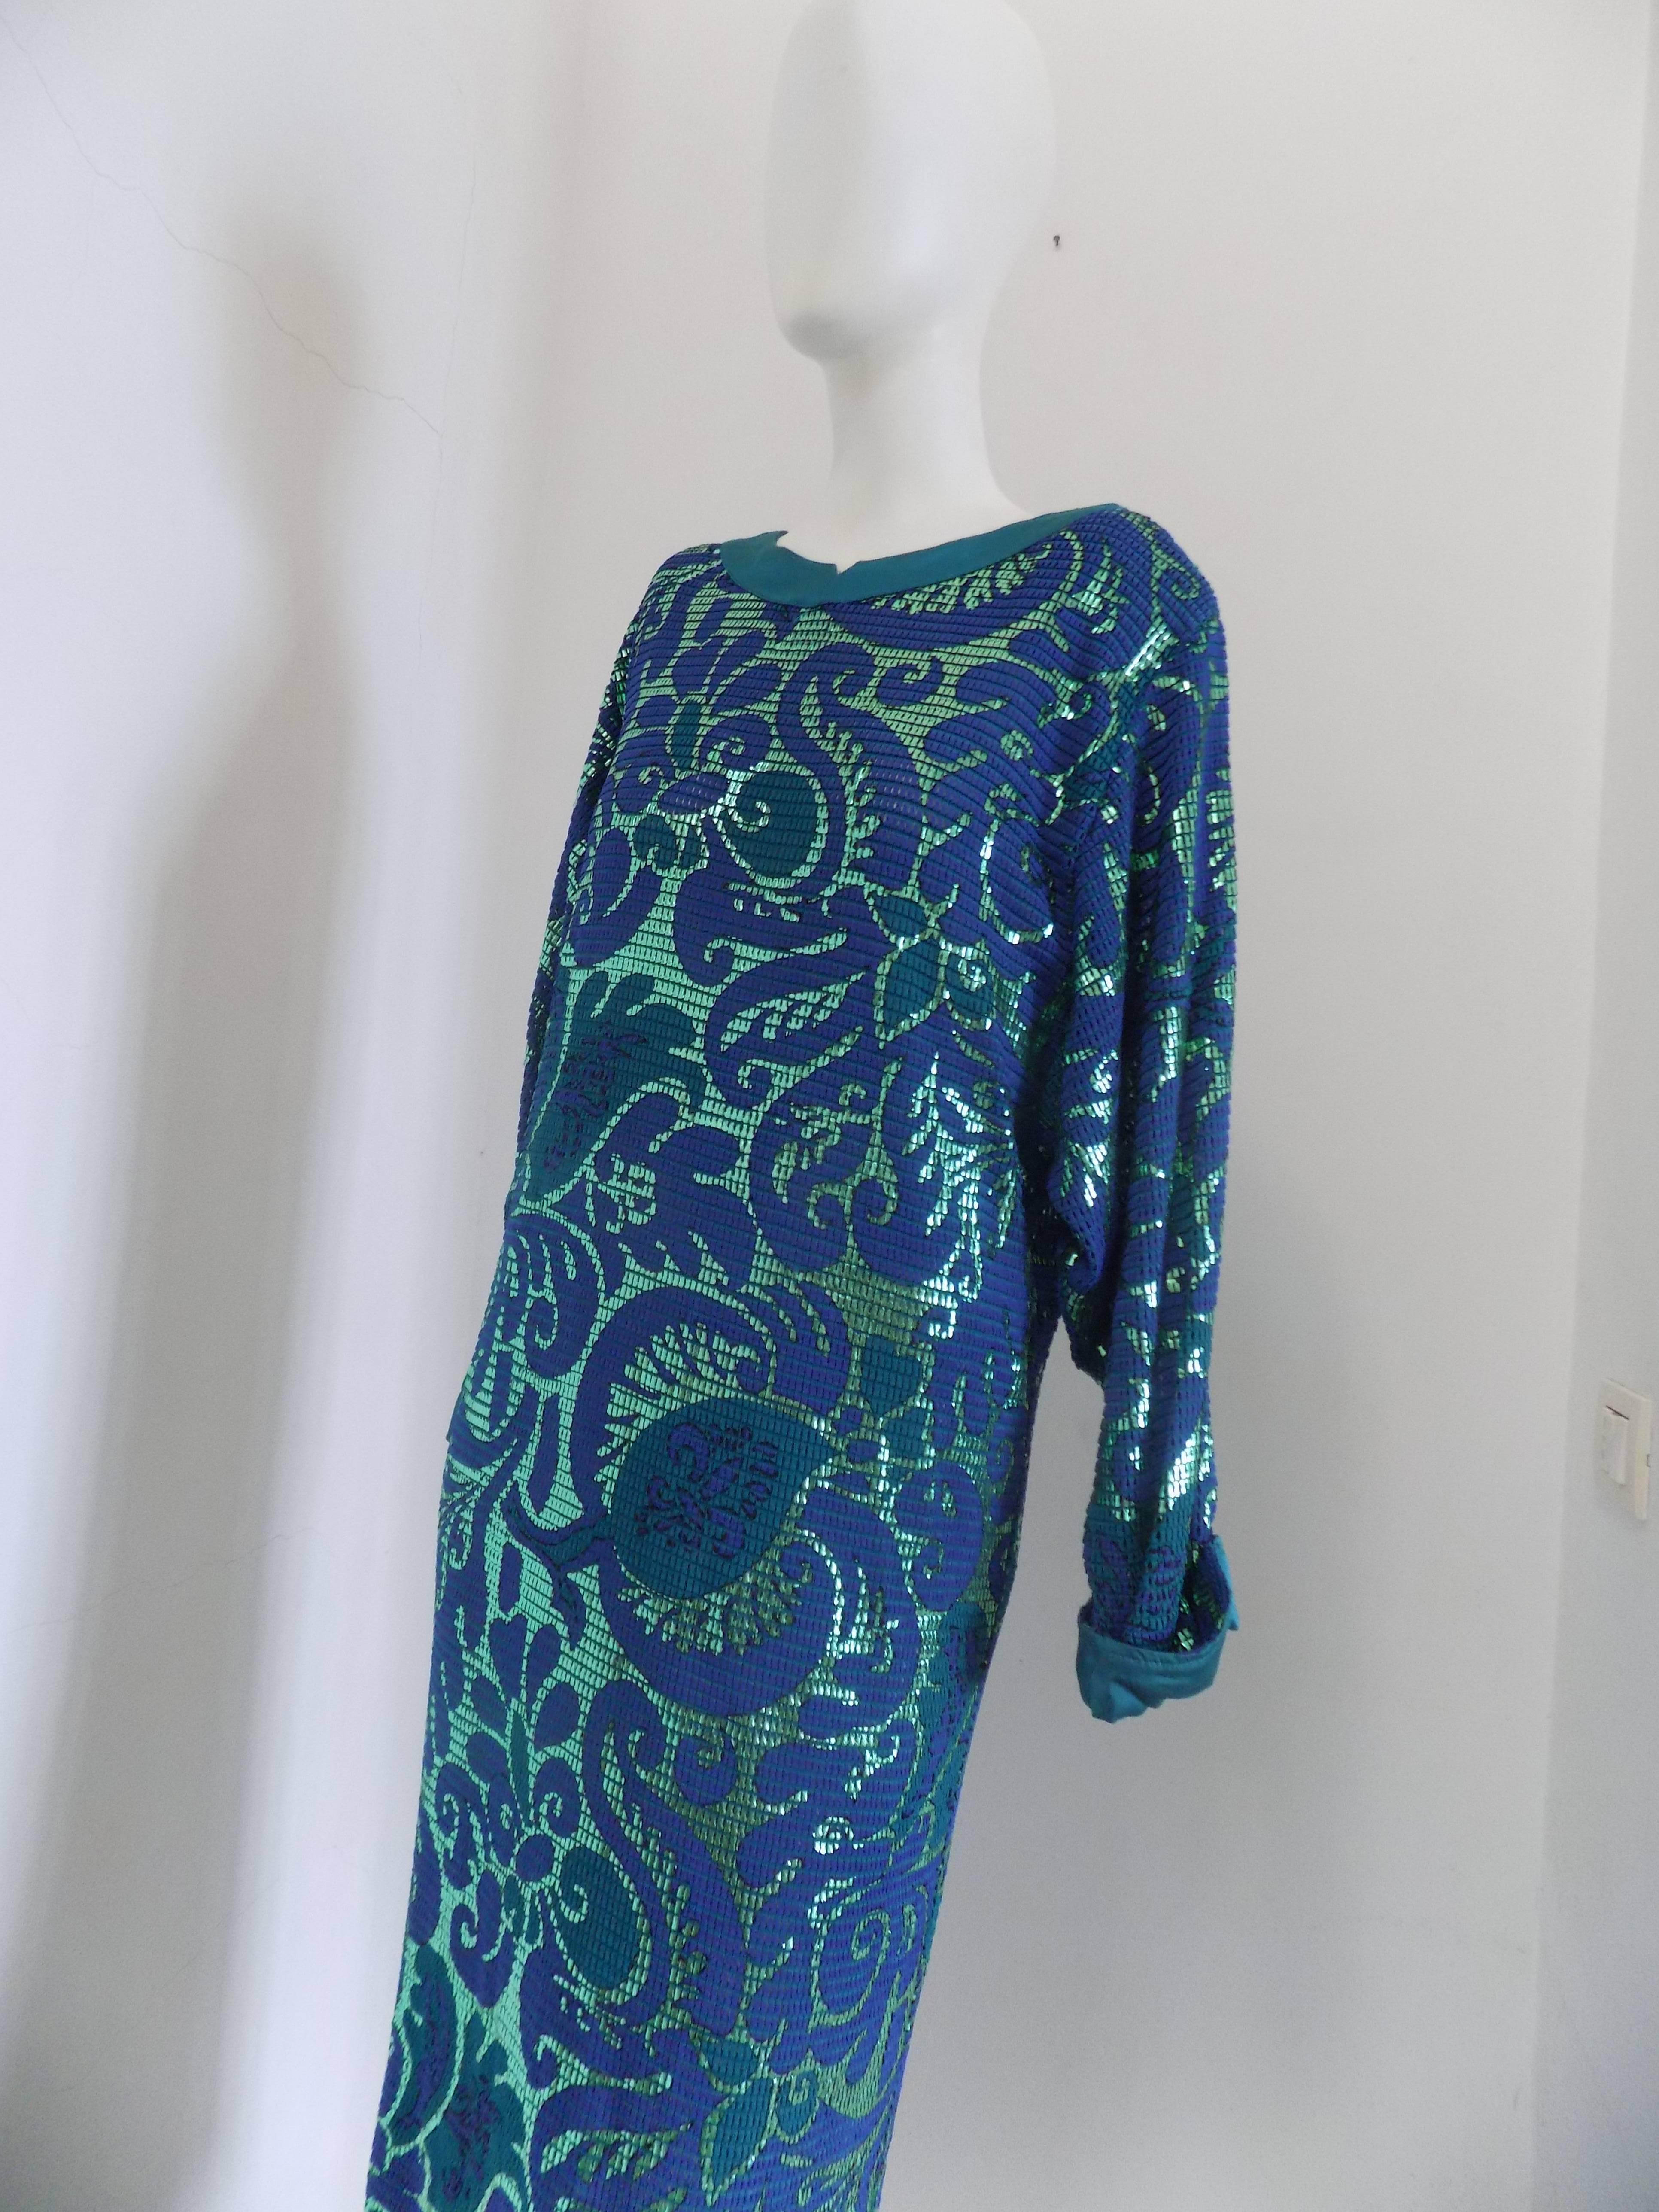 1980s Parah Green Blu longsleeve Dress

Totally made in italy